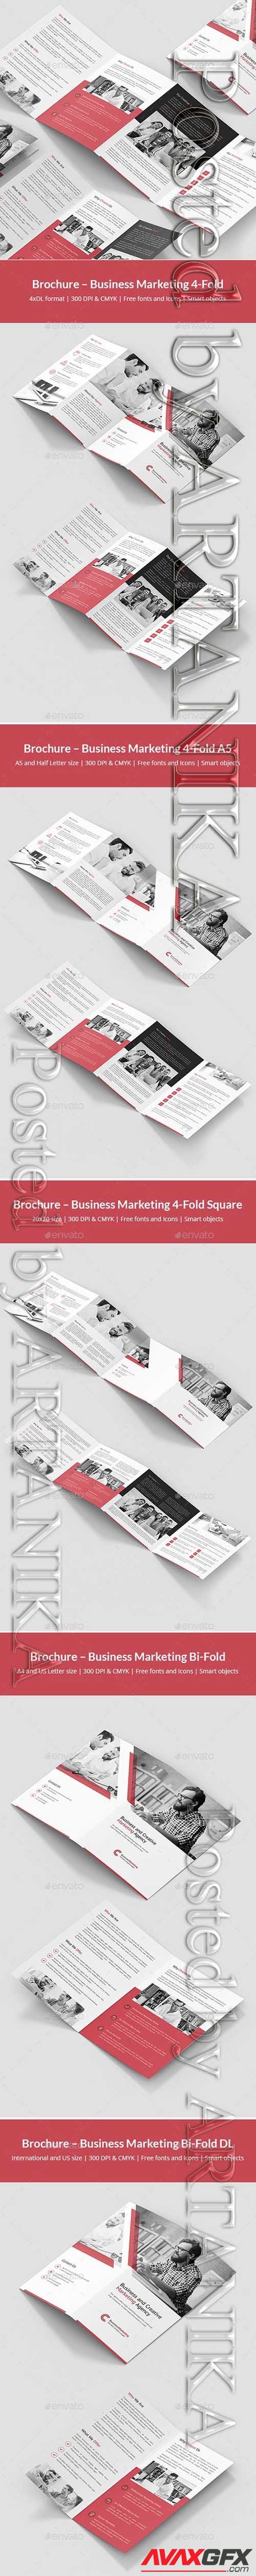 GraphicRiver - Business Marketing  Brochures Bundle Print Templates 10 in 1 21522205